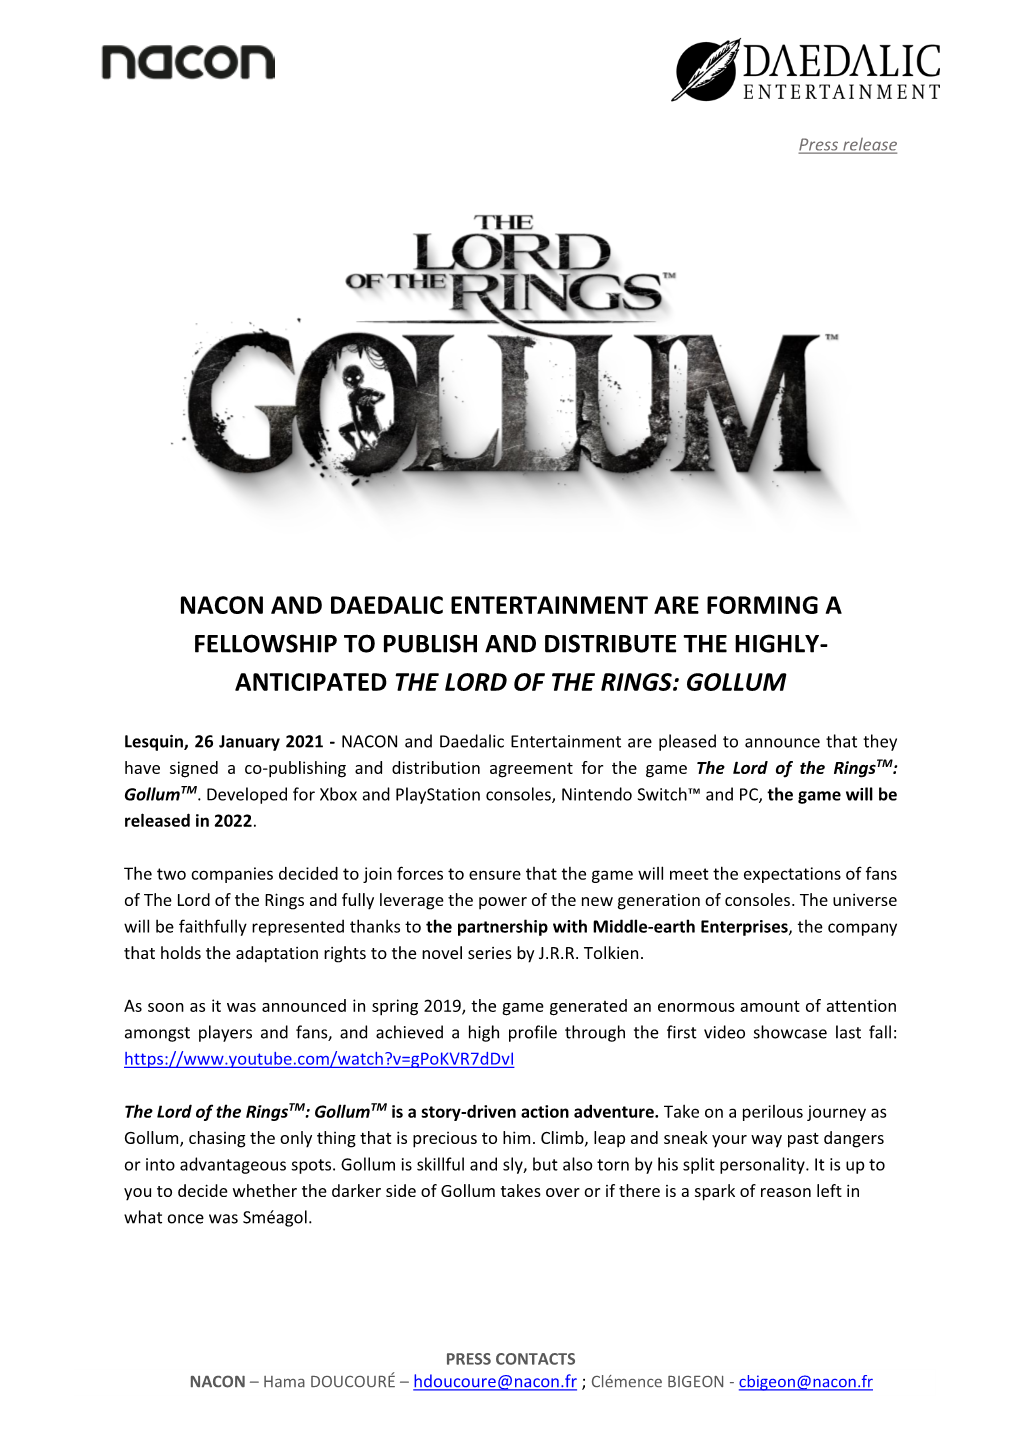 Nacon and Daedalic Entertainment Are Forming a Fellowship to Publish and Distribute the Highly- Anticipated the Lord of the Rings: Gollum